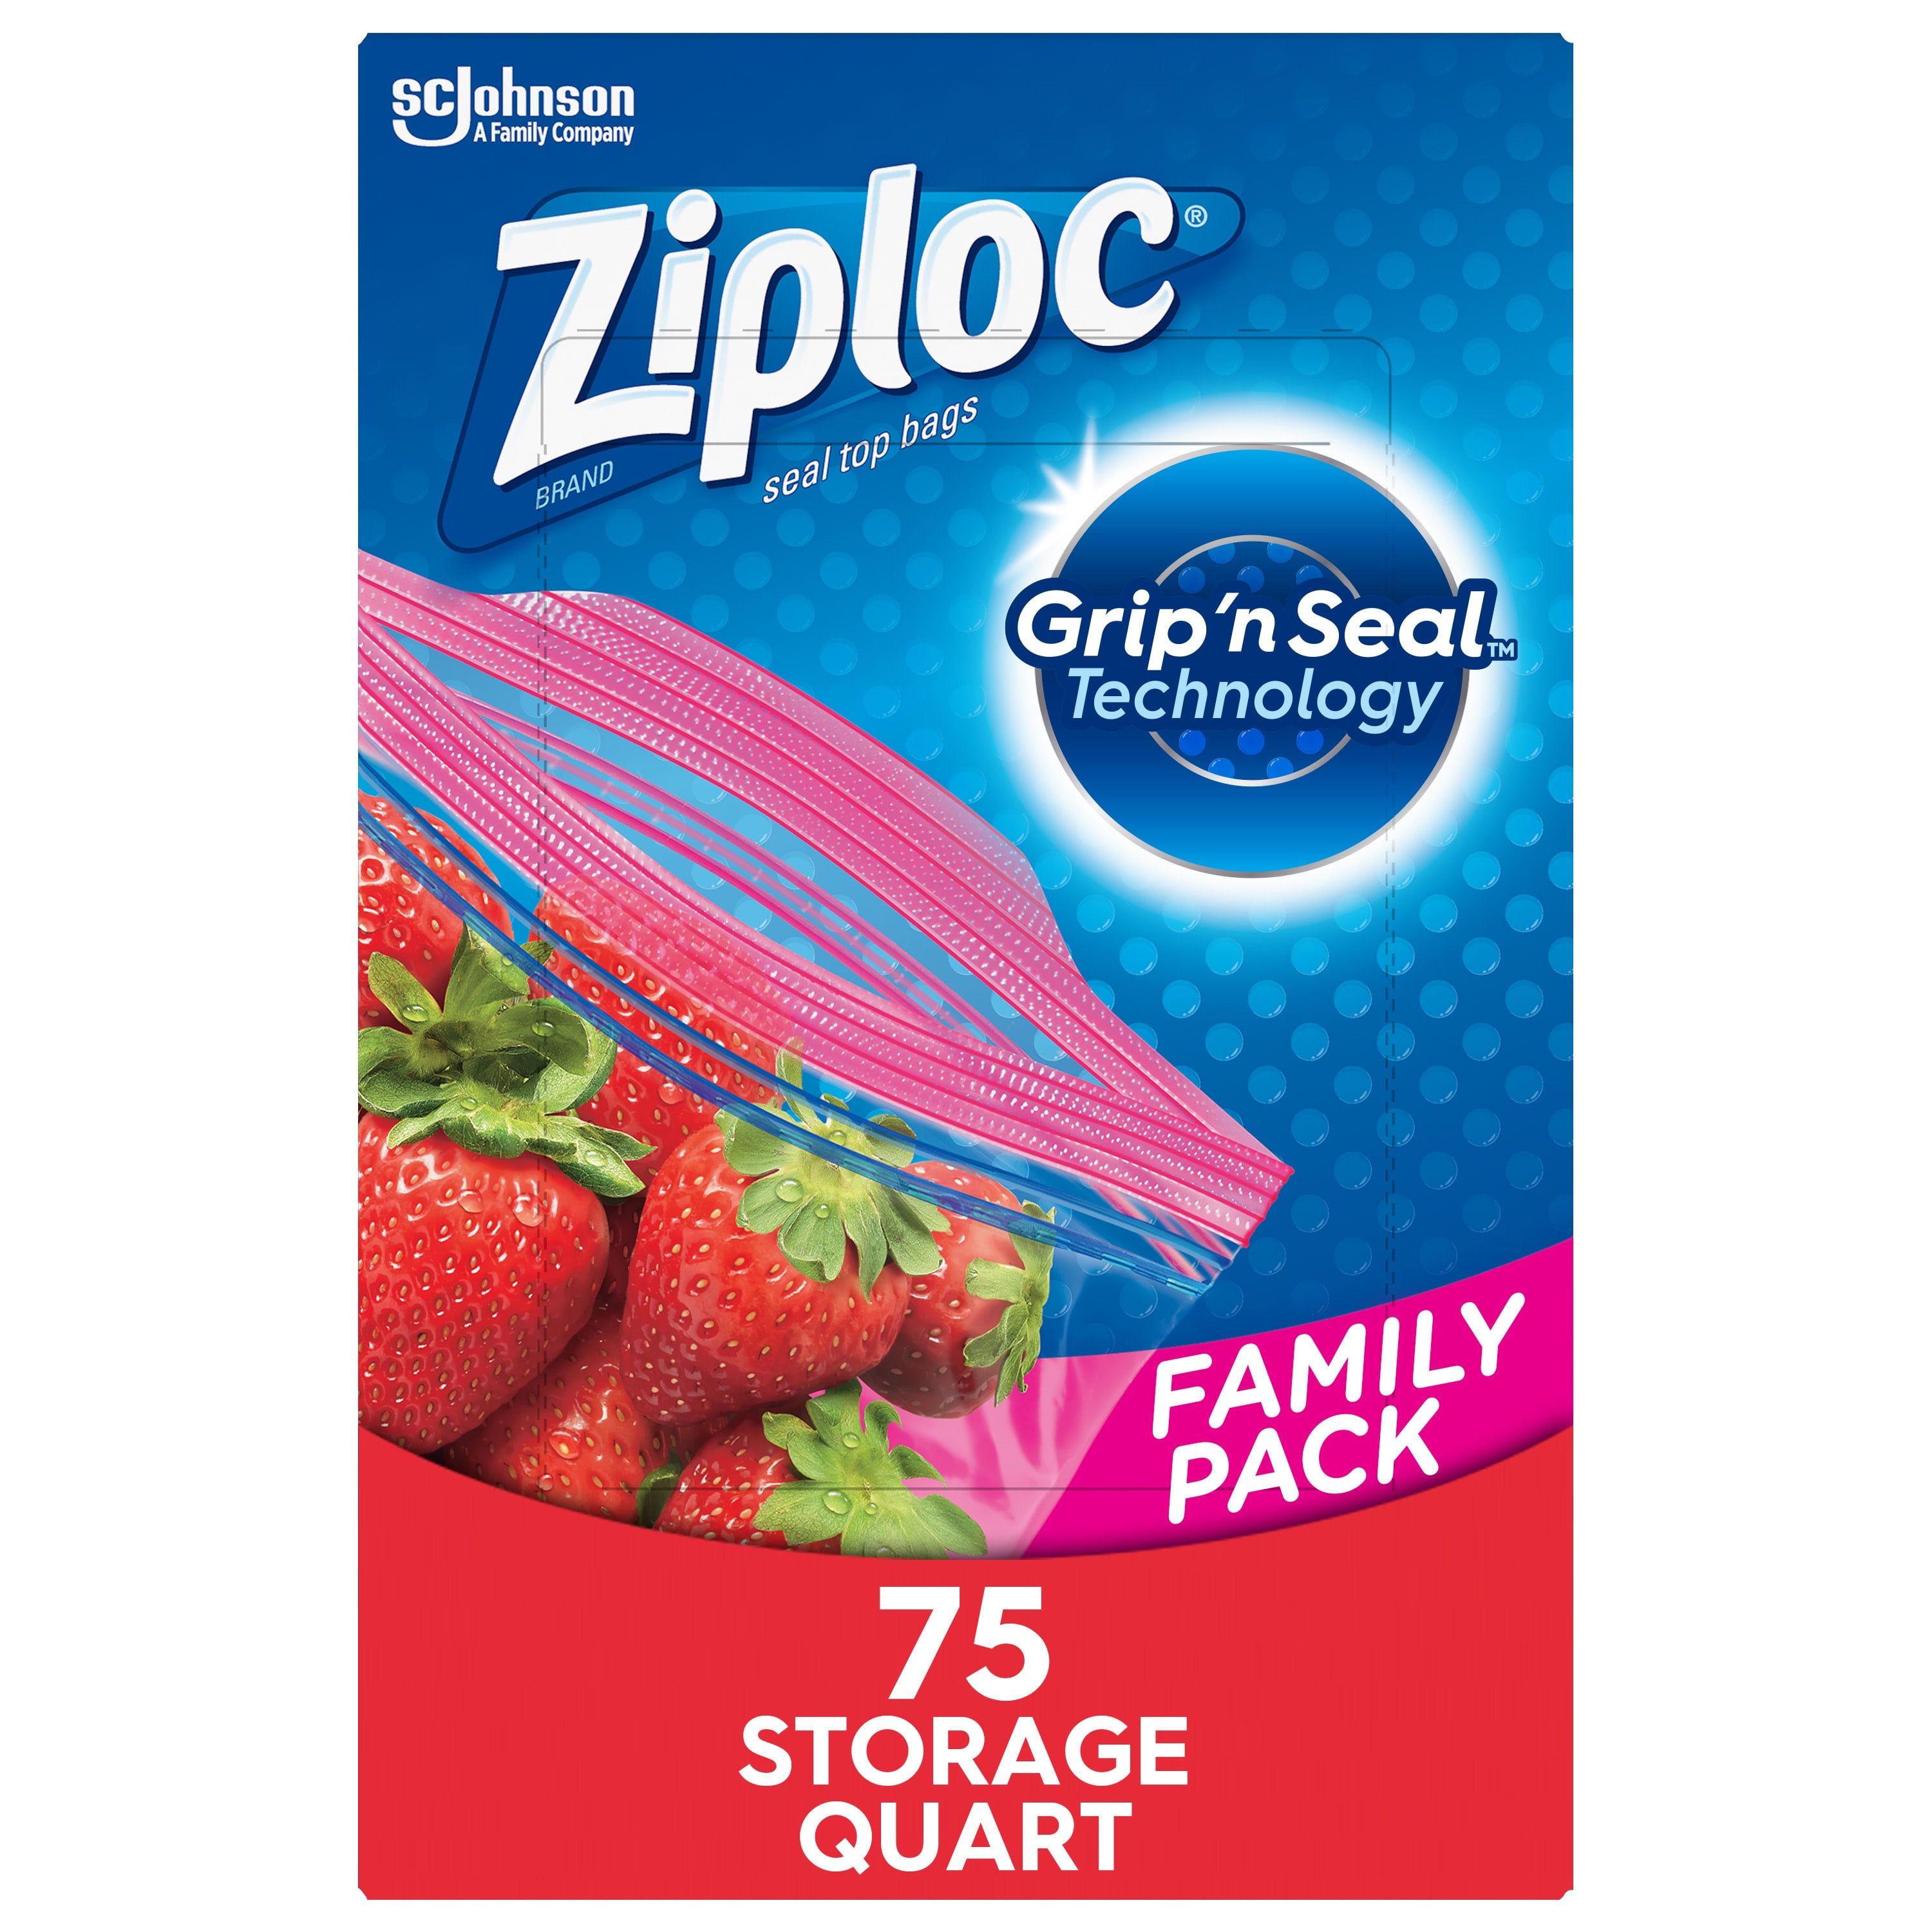 Ziploc® Brand Storage Bags with Grip 'n Seal Technology, Quart, 75 Count